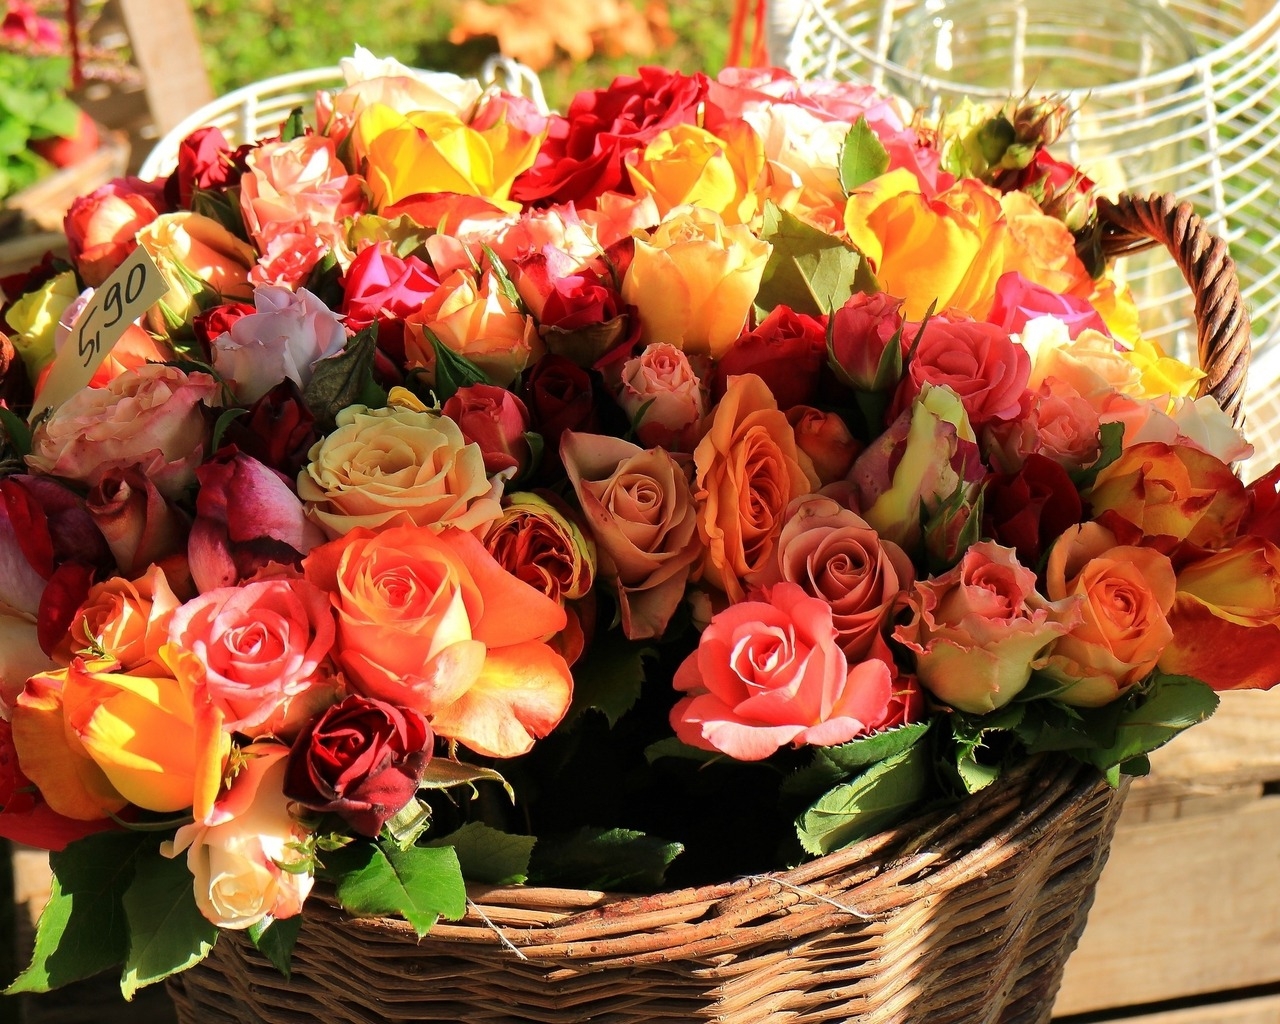 Basket of Roses for 1280 x 1024 resolution